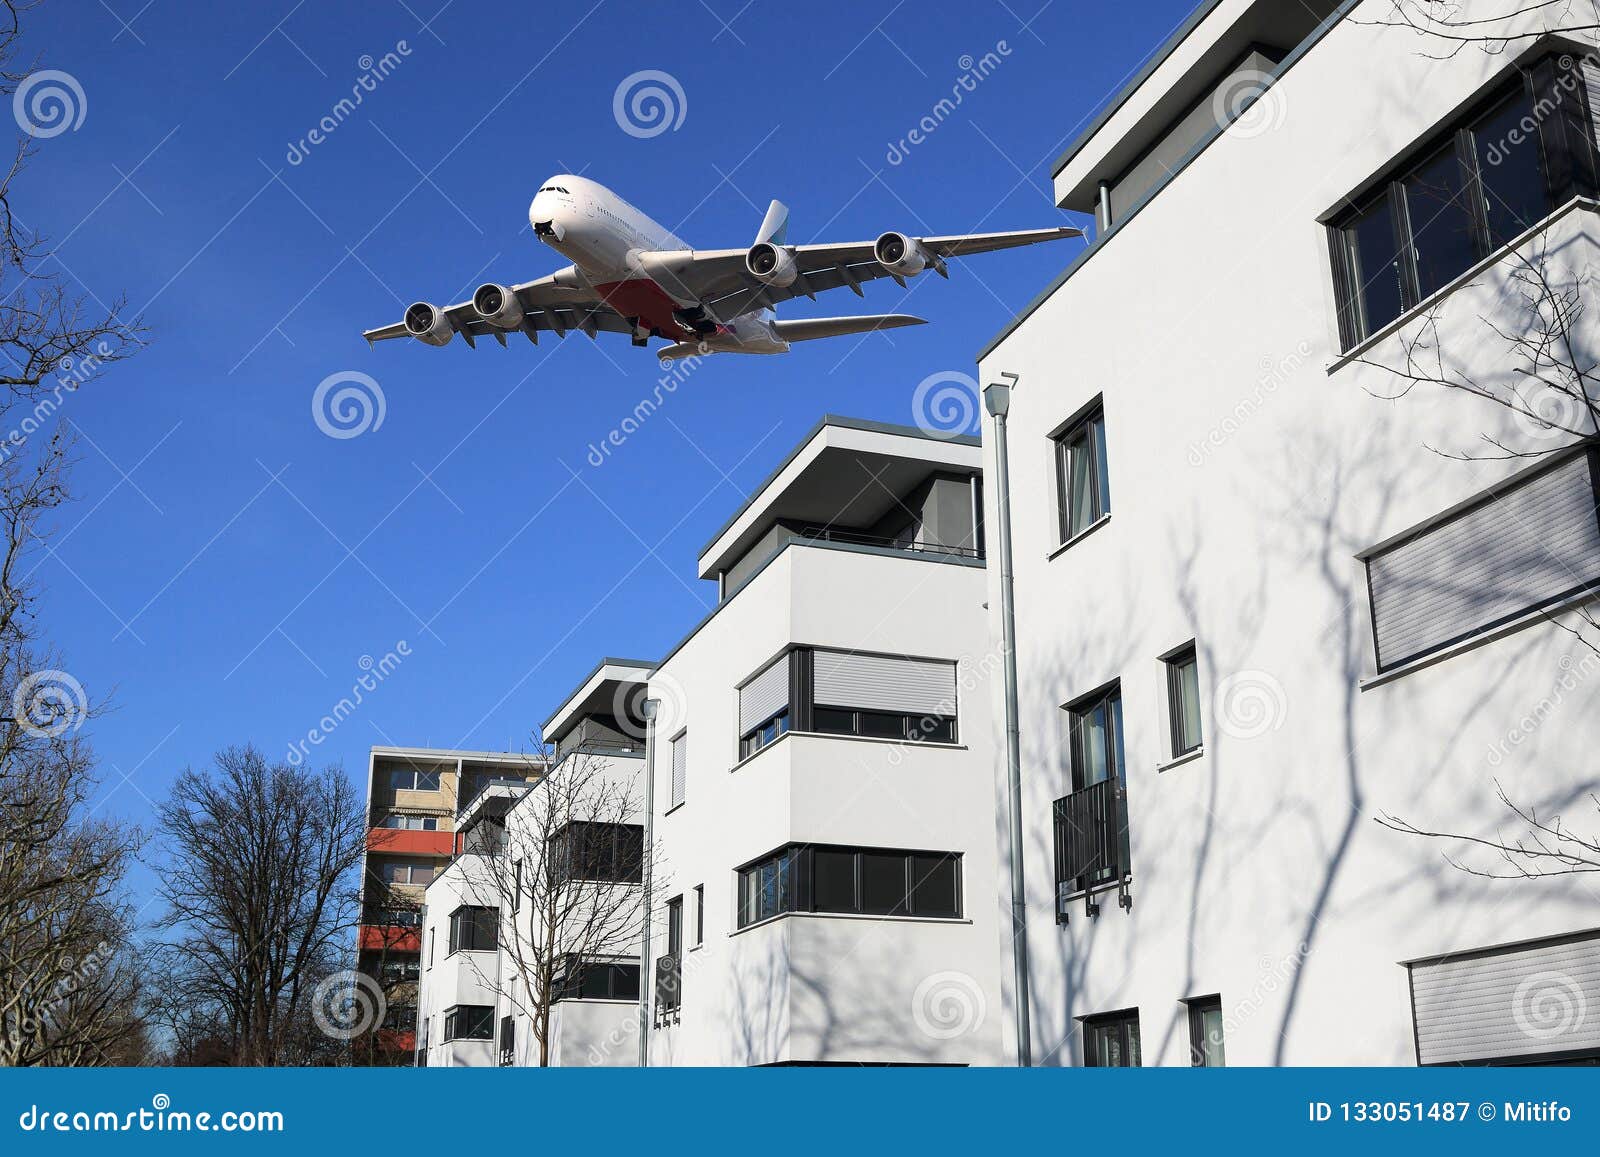 aircraft noise and commercial wide-body aircraft over houses